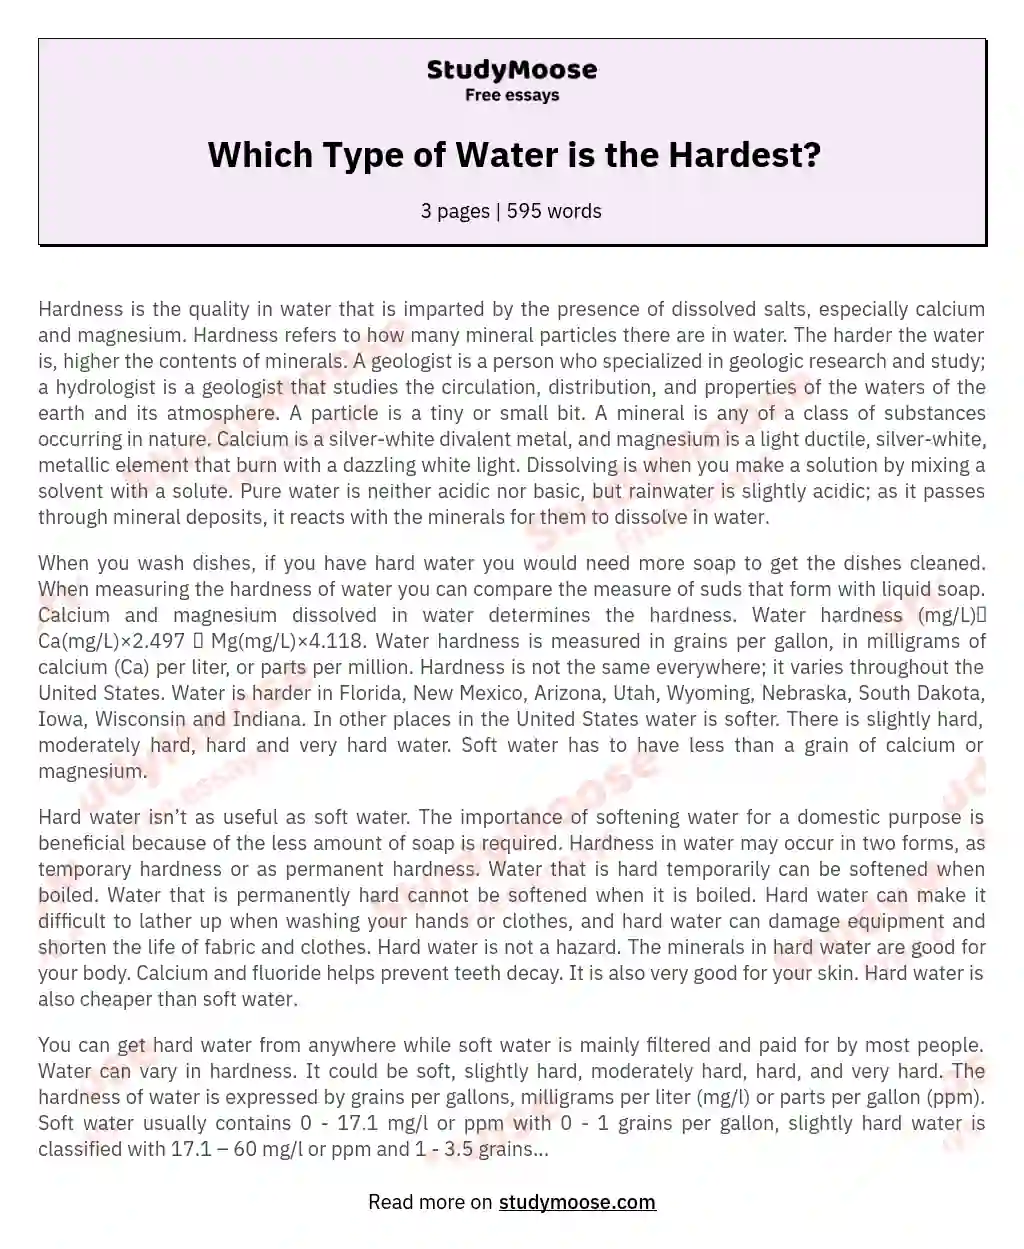 Which Type of Water is the Hardest? essay